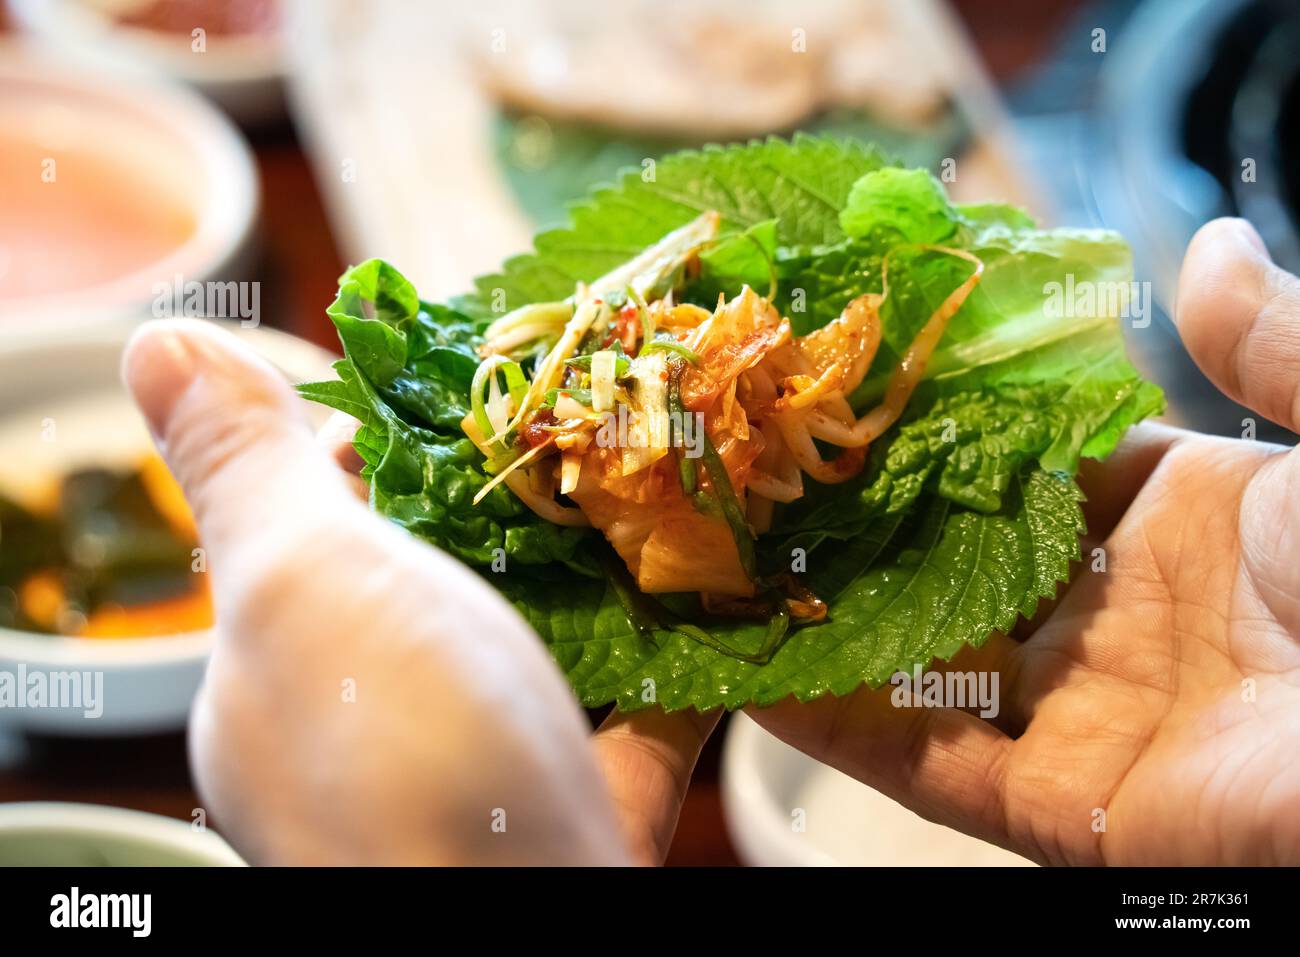 Pan-fried black pork meal in Jeju Korean restaurant, fresh delicious korean food cuisine on iron plate with lettuce, kimchi, banchan and sauce, lifest Stock Photo